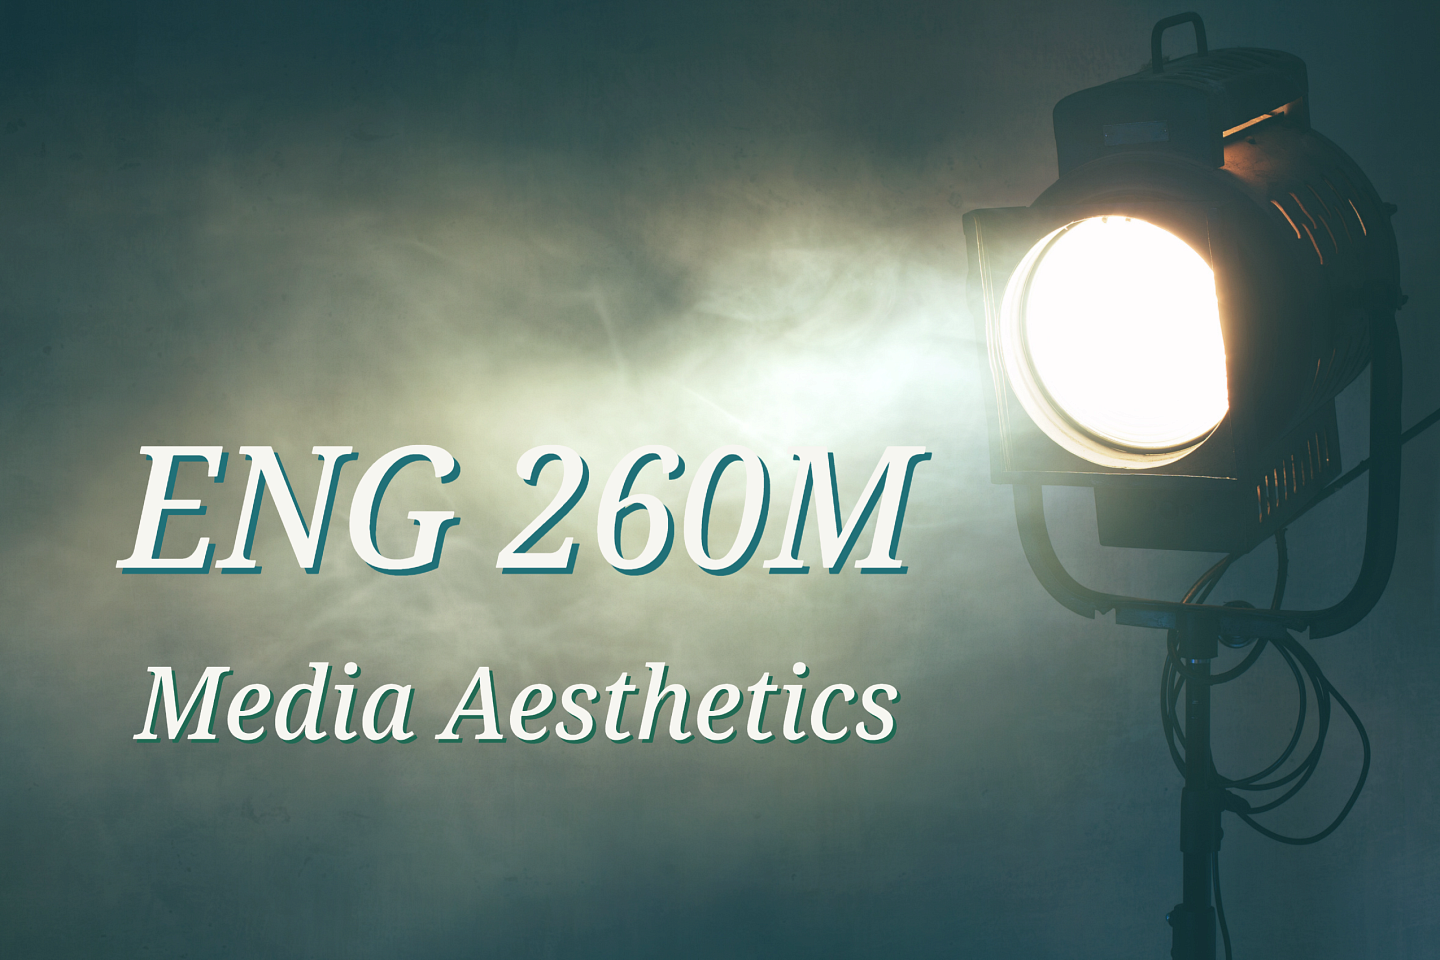 graphic of a spotlight surrounded by small amount of smoke with visible light beams, on left the words "ENG 260, Media Aesthetics"